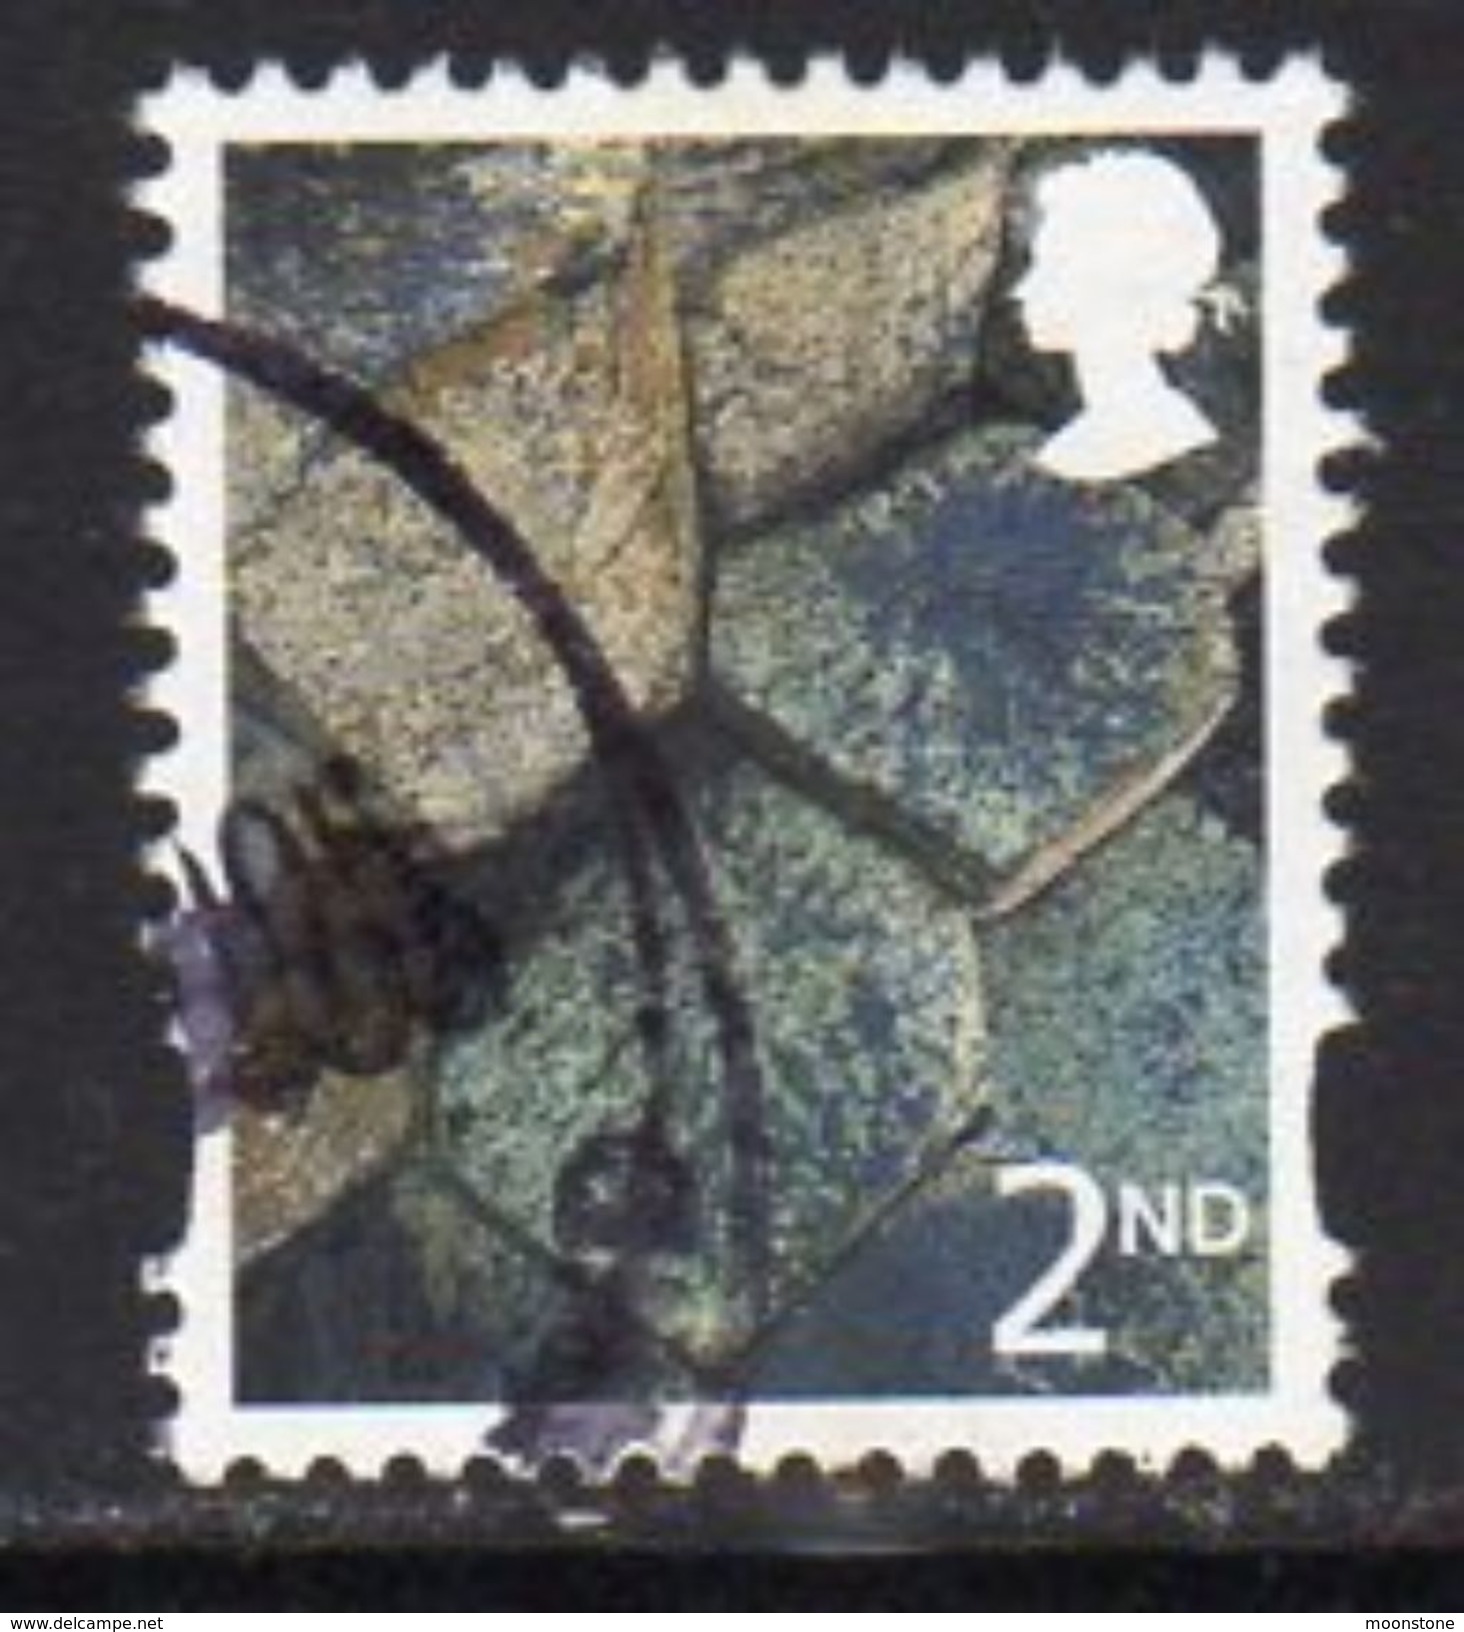 GB N. Ireland 2003-17 2nd Class With Border Regional Country, Used, SG 94 - Noord-Ierland